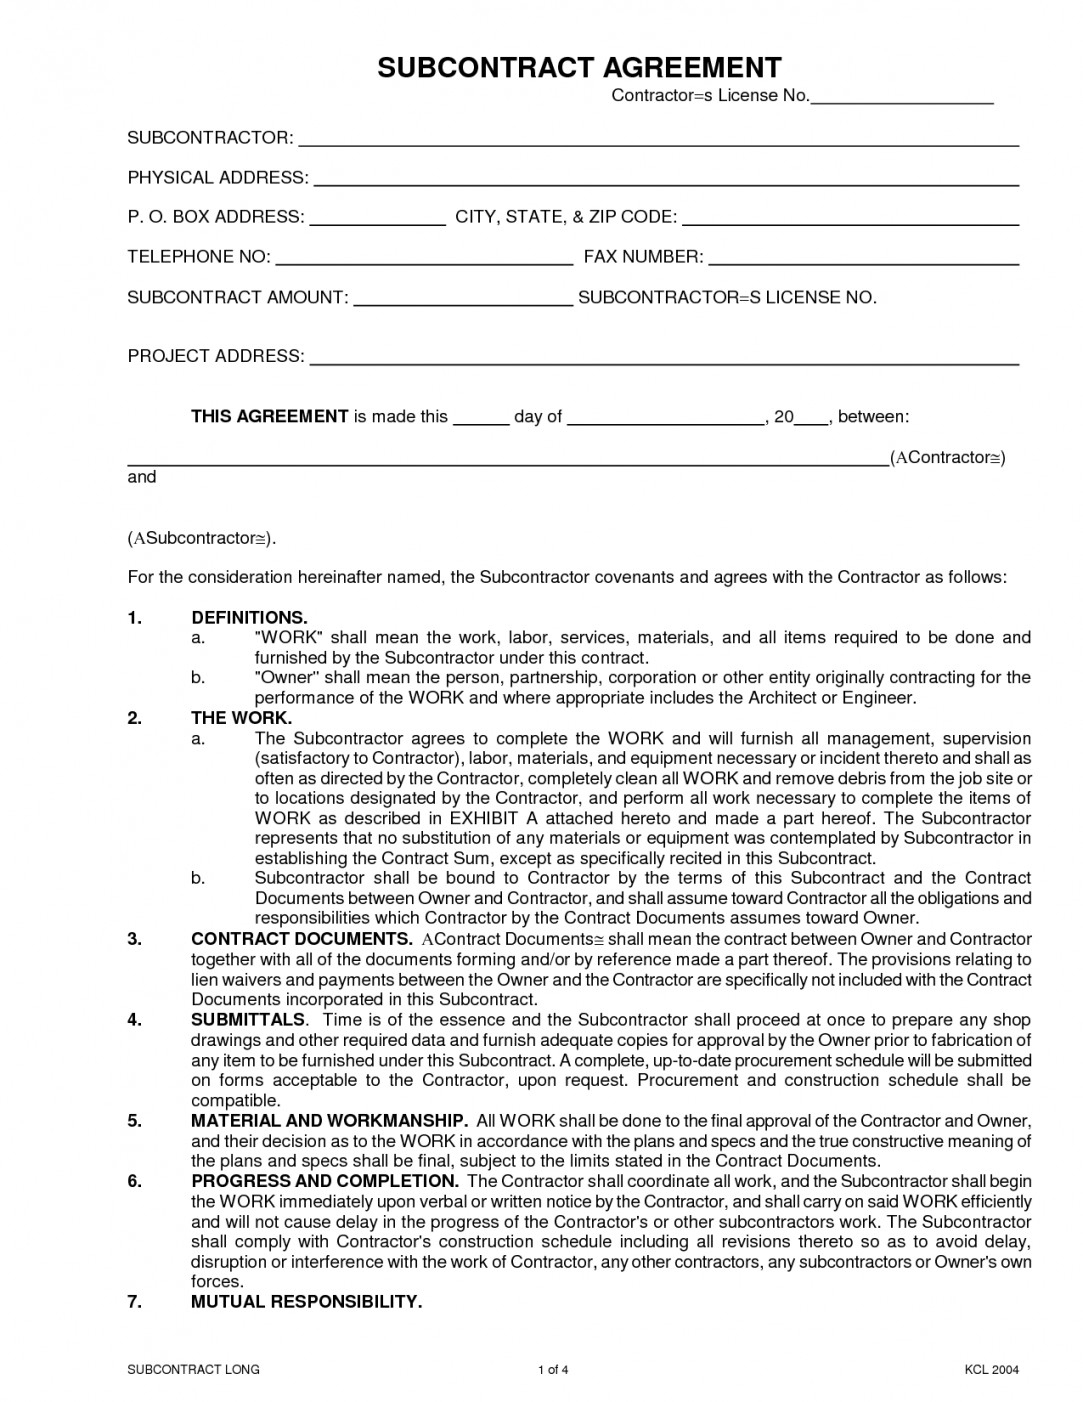 Subcontractor Agreement Template Word | Lostranquillos - Free Printable Subcontractor Agreement